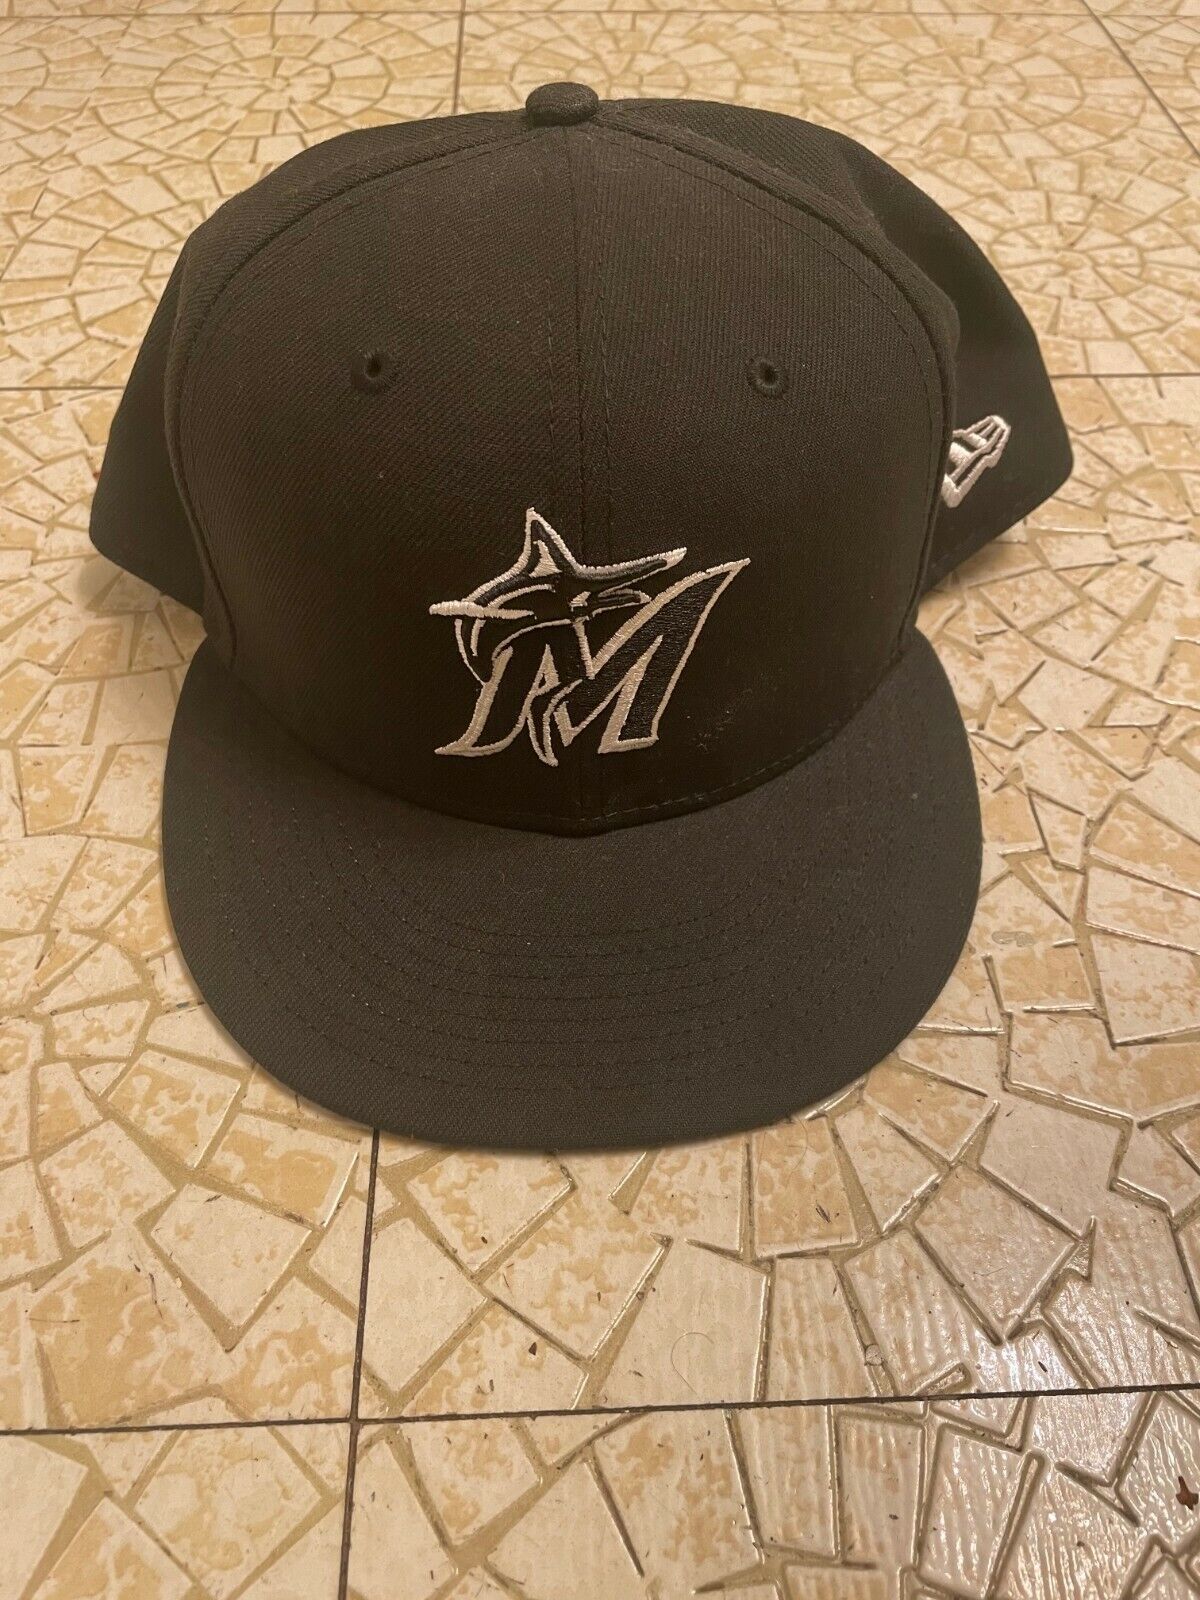 New Era Miami Marlins Black and White Fashion 59FIFTY Fitted Hat - Size 8 - NWOT